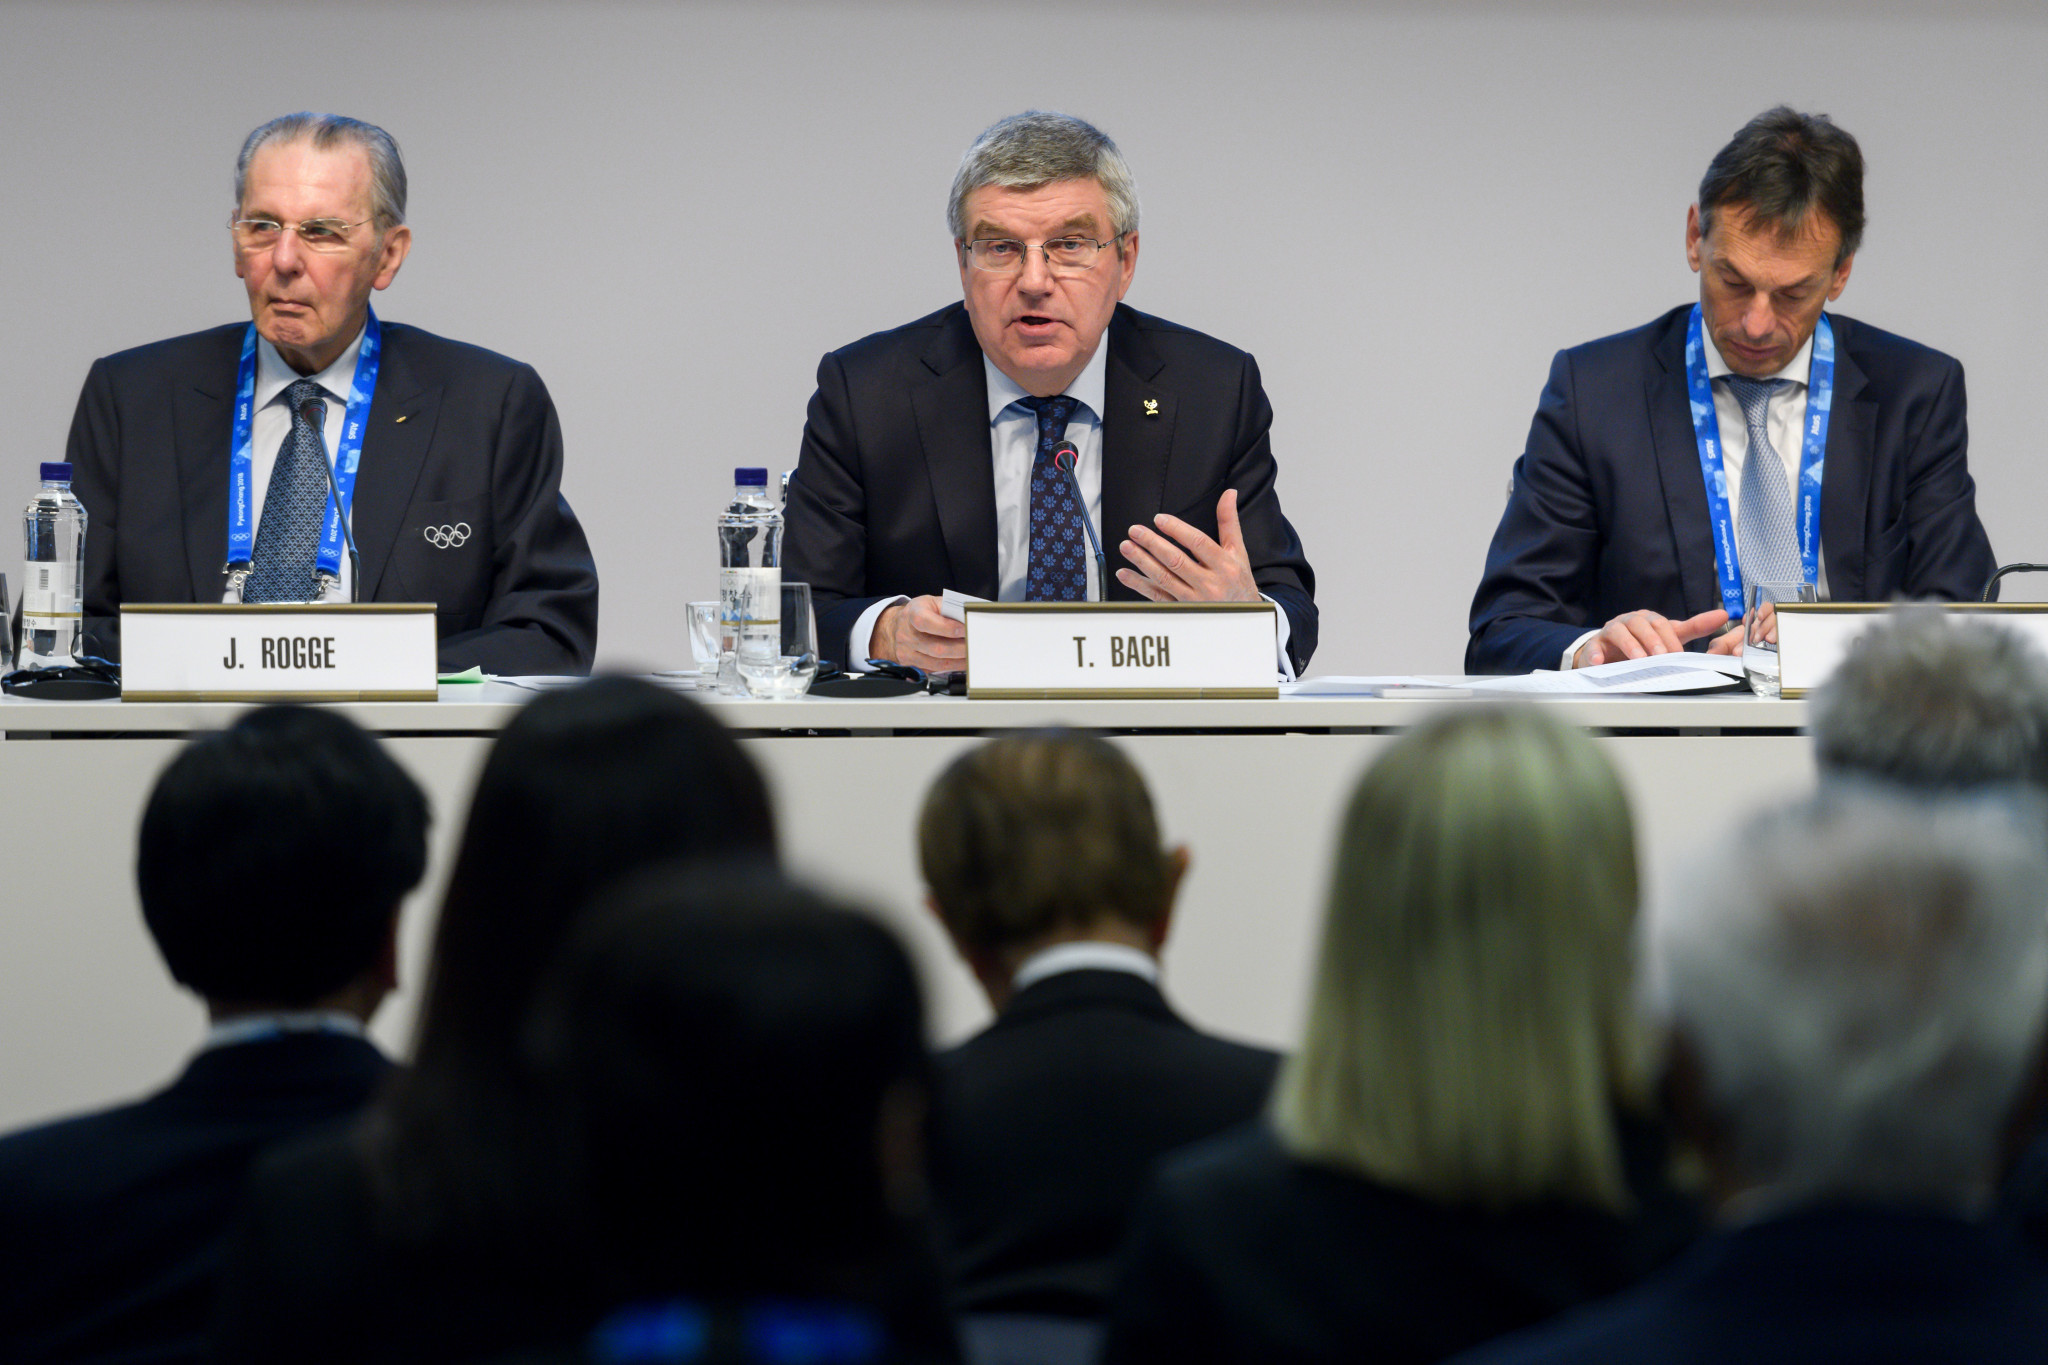 The IOC sought to draw a line under the Russian doping crisis at the IOC Session in Pyeongchang last year ©Getty Images